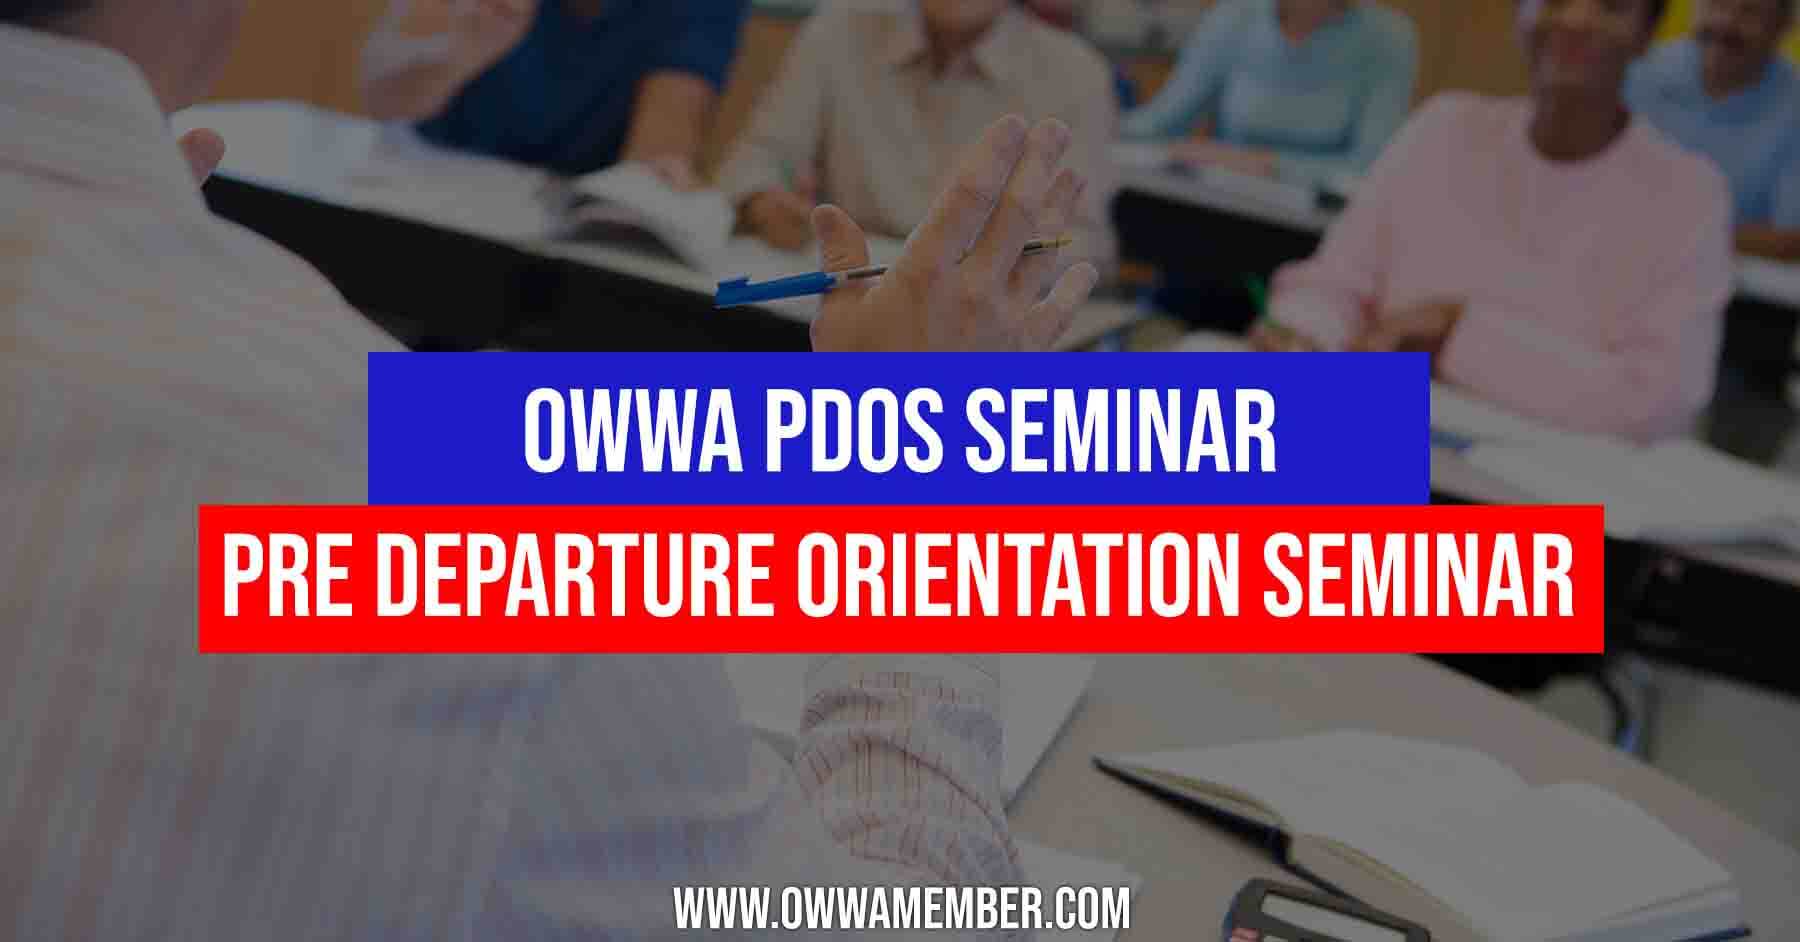 how to attend owwa pdos pre departure orientation seminar